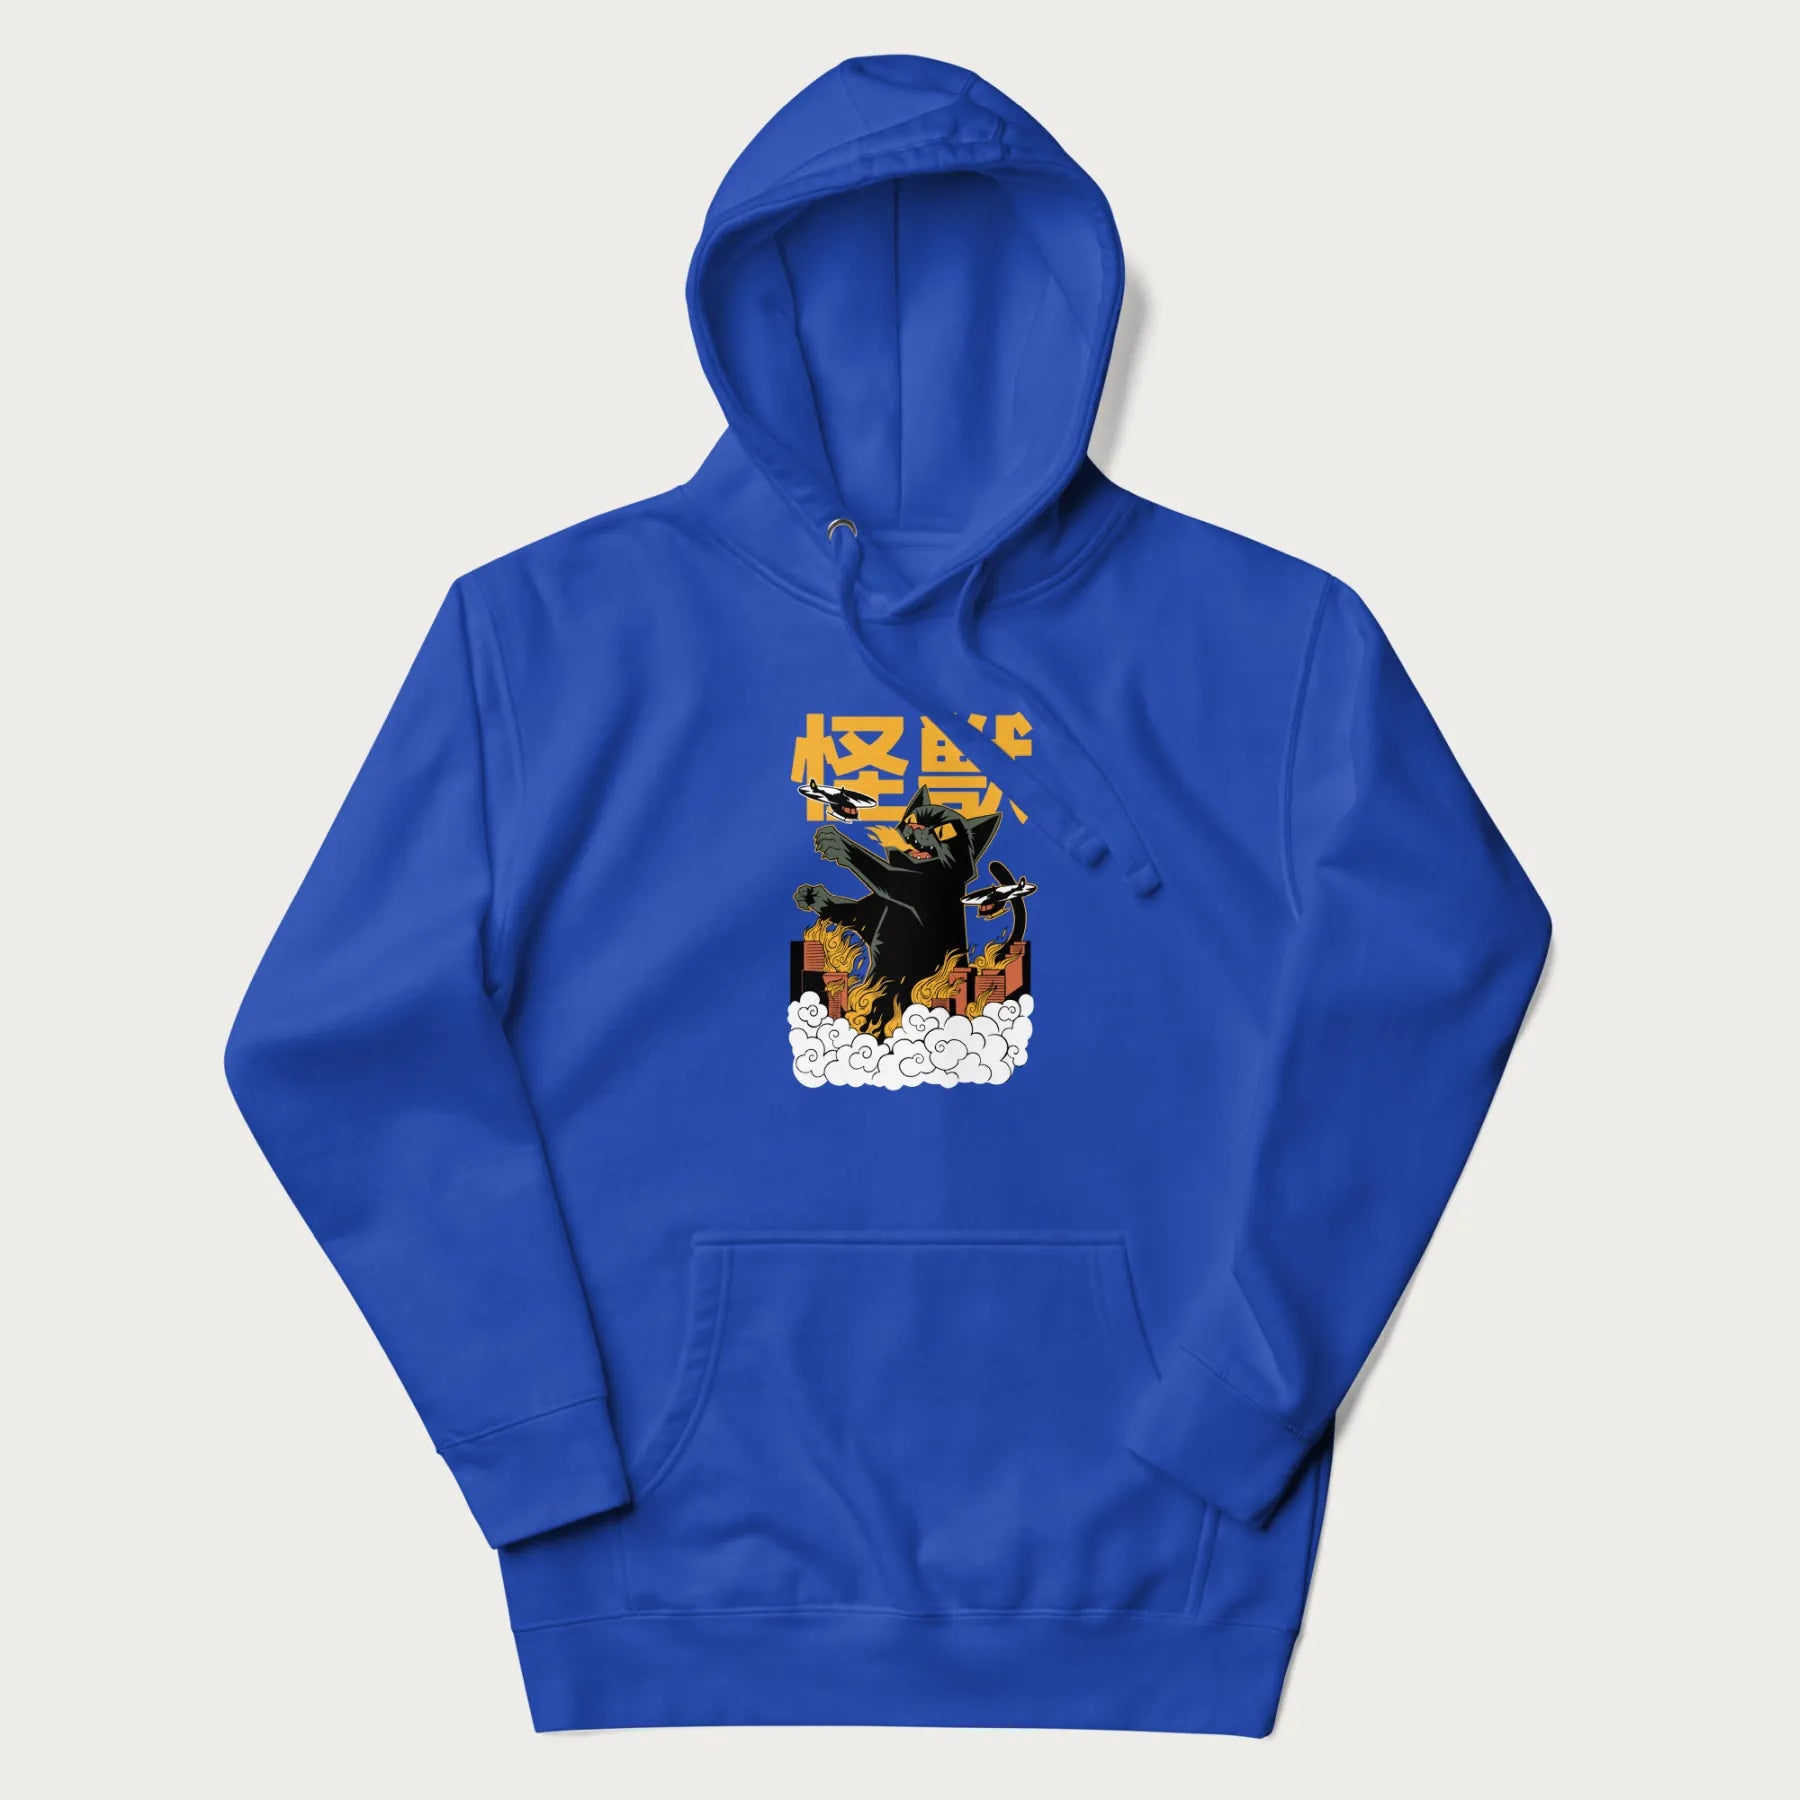 Royal blue hoodie with graphic of a 'Kaiju Cat' with helicopters and flames in a burning city.